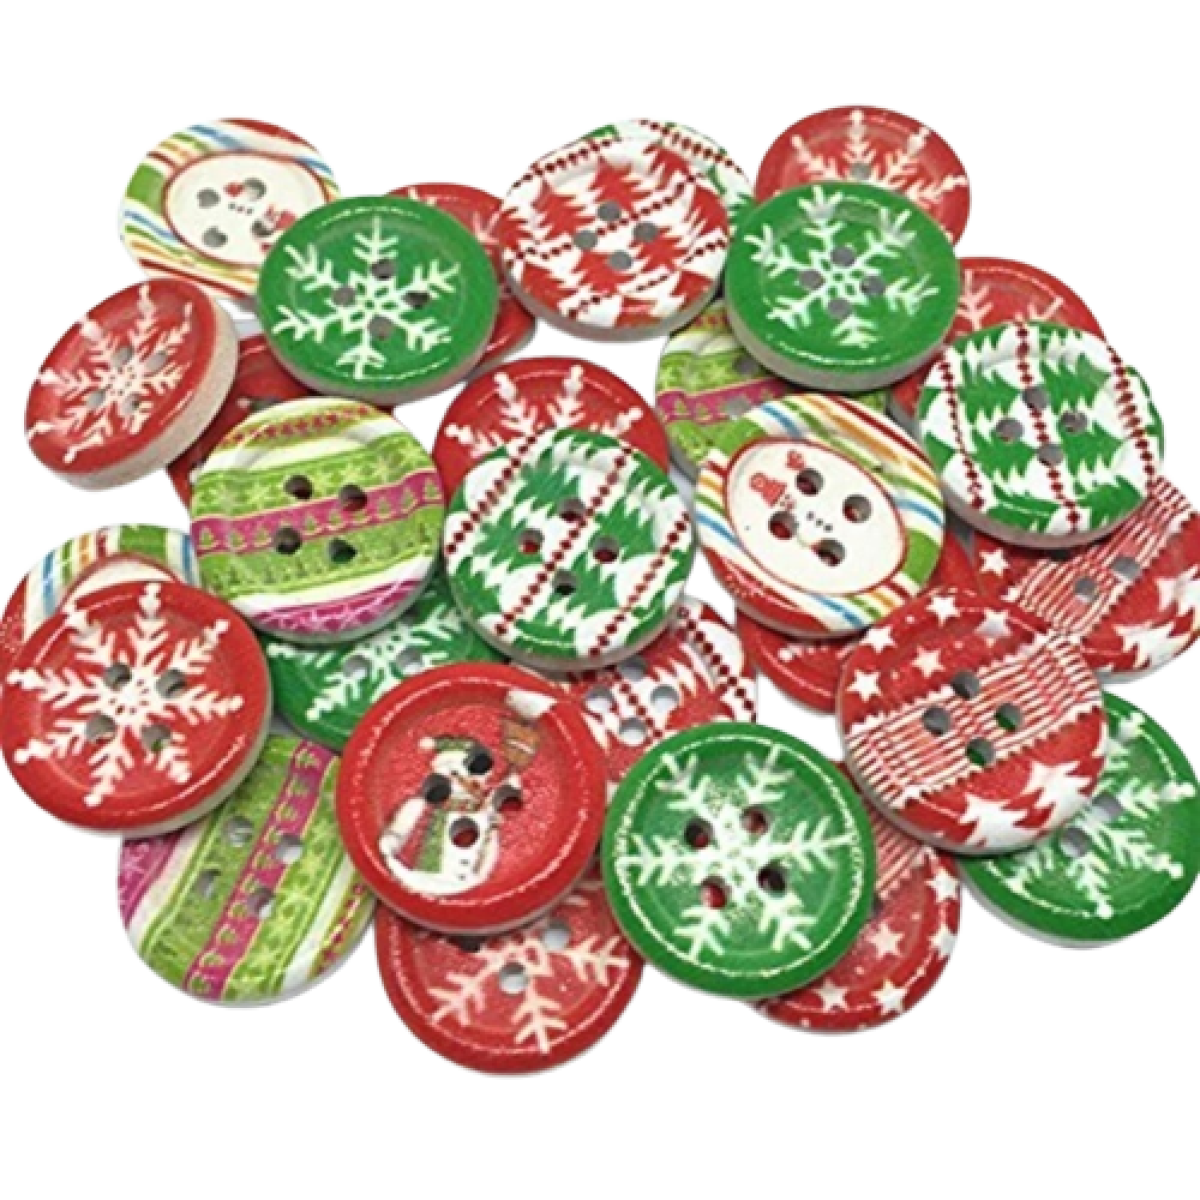 25Pcs 18Mm Round Christmas Patterns Buttons Scrapbooking Xmas Theme Clothing